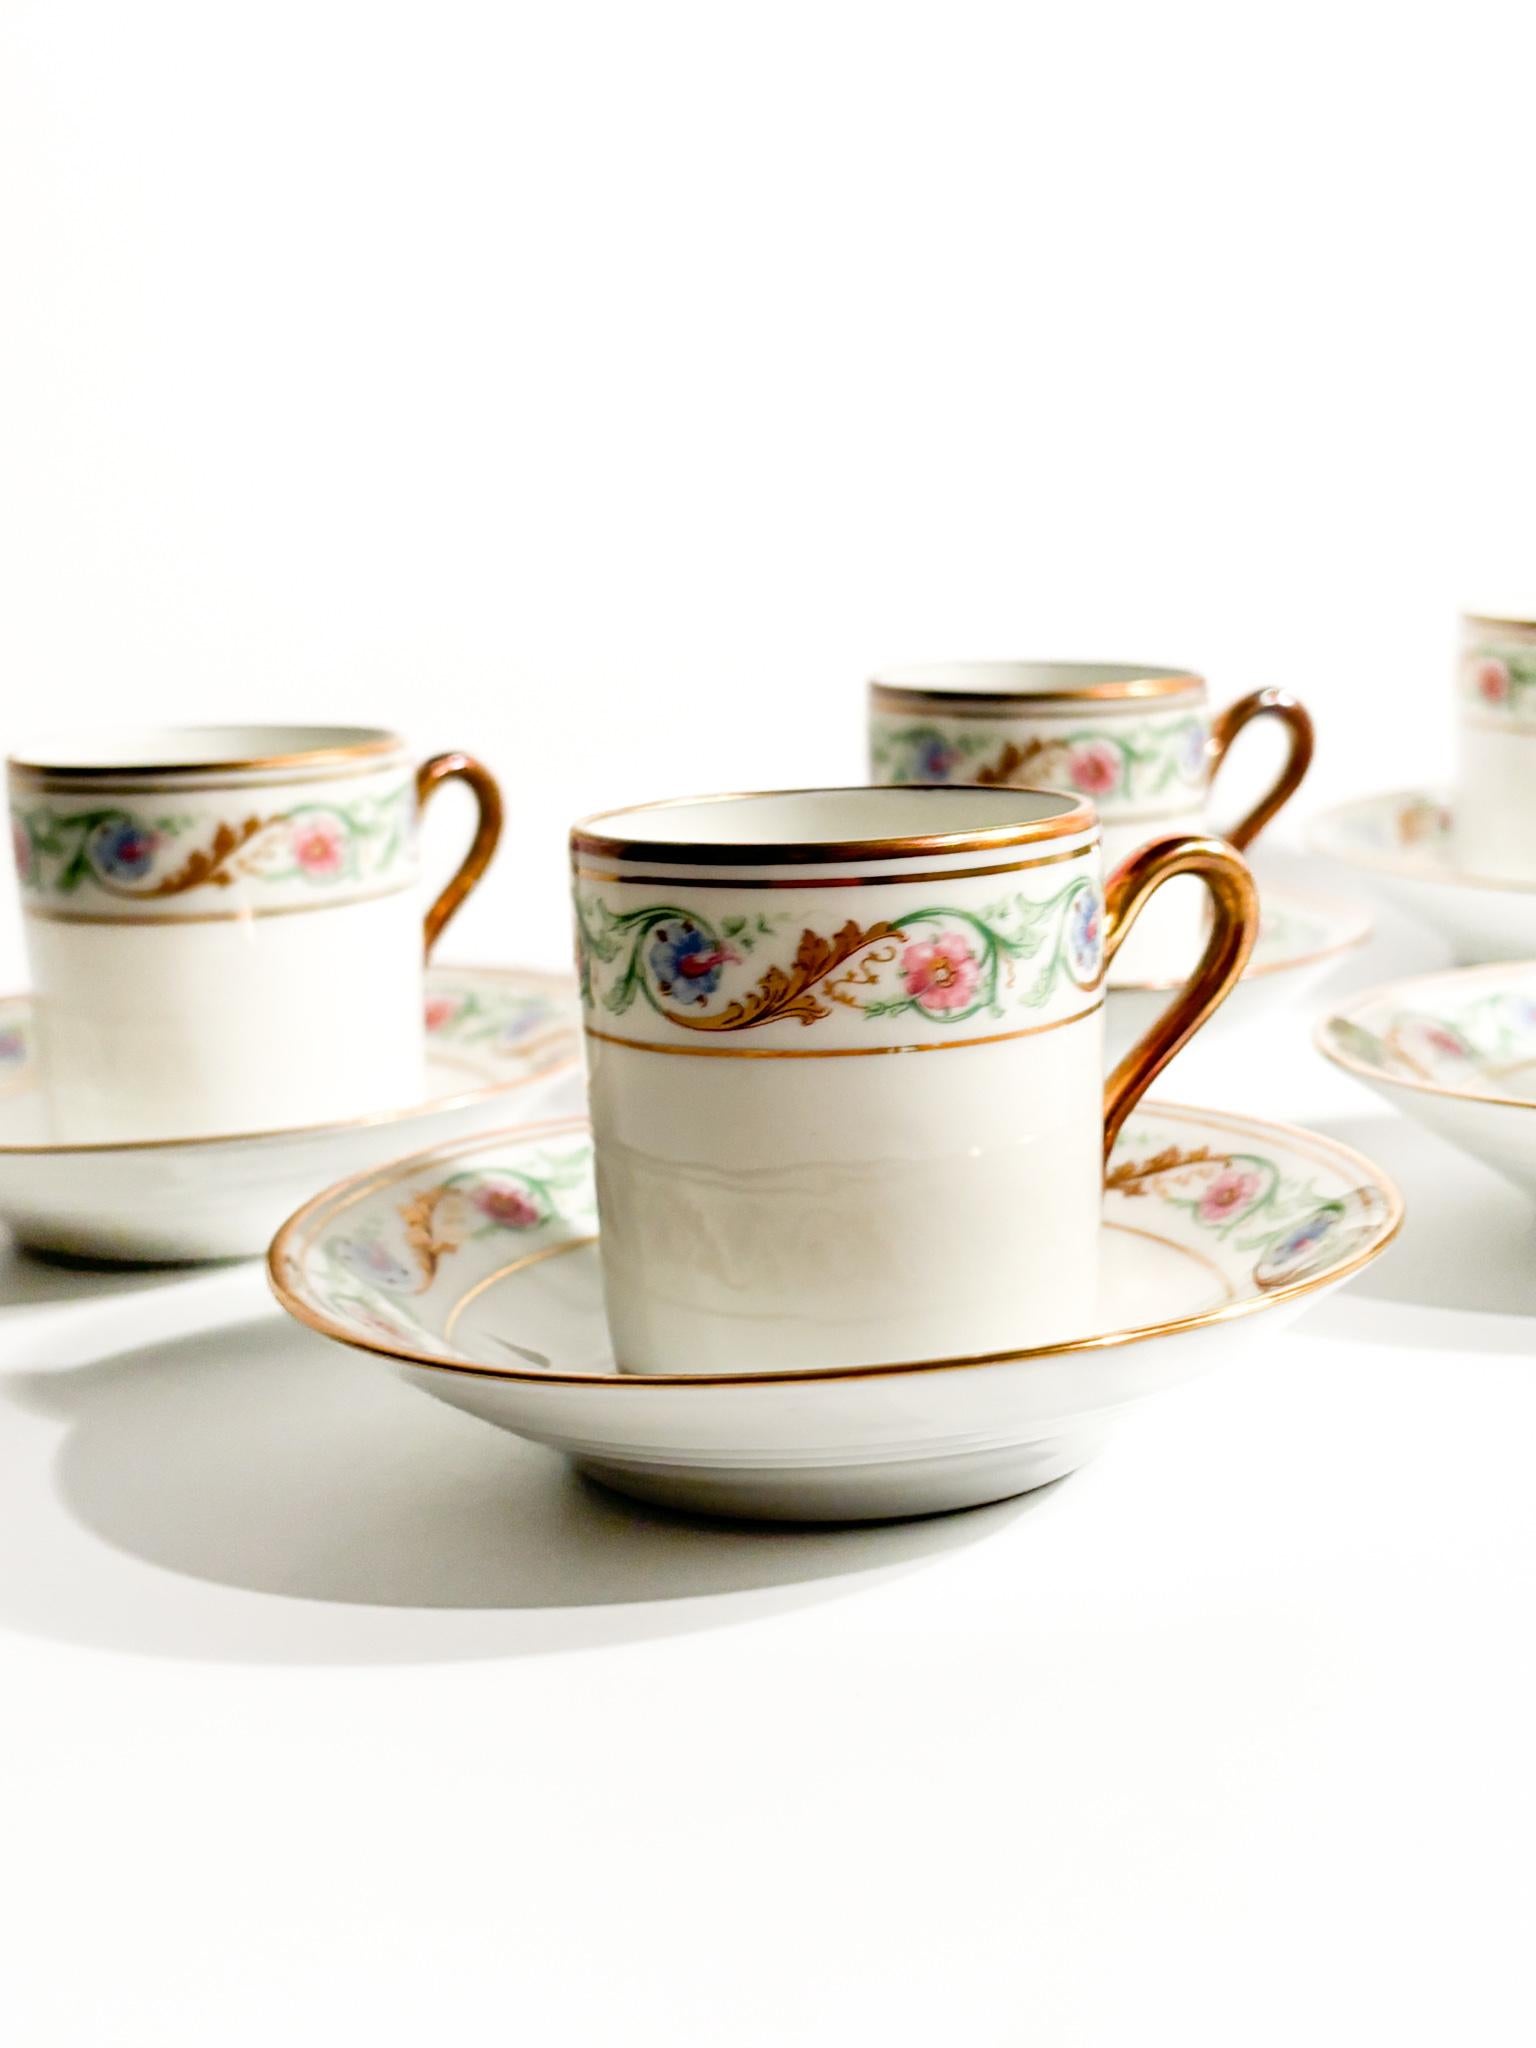 Set of Six Porcelain Coffee Cups by Ginori Doccia Pittoria from the 1940s For Sale 1